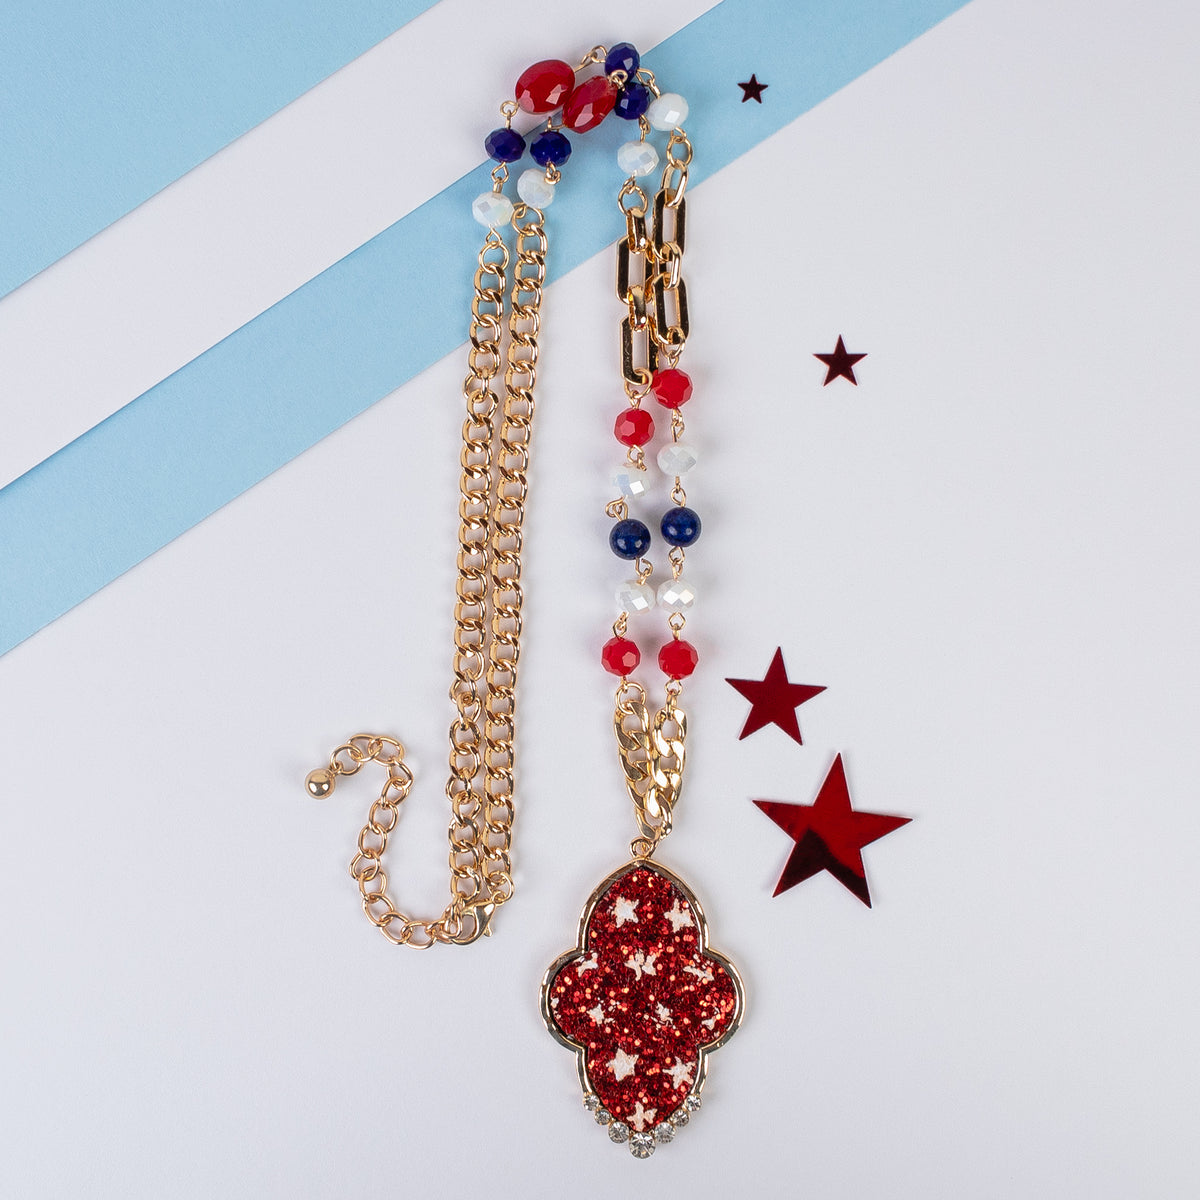 72956 - 4th of July Pendant Necklace - Red, White, & Blue